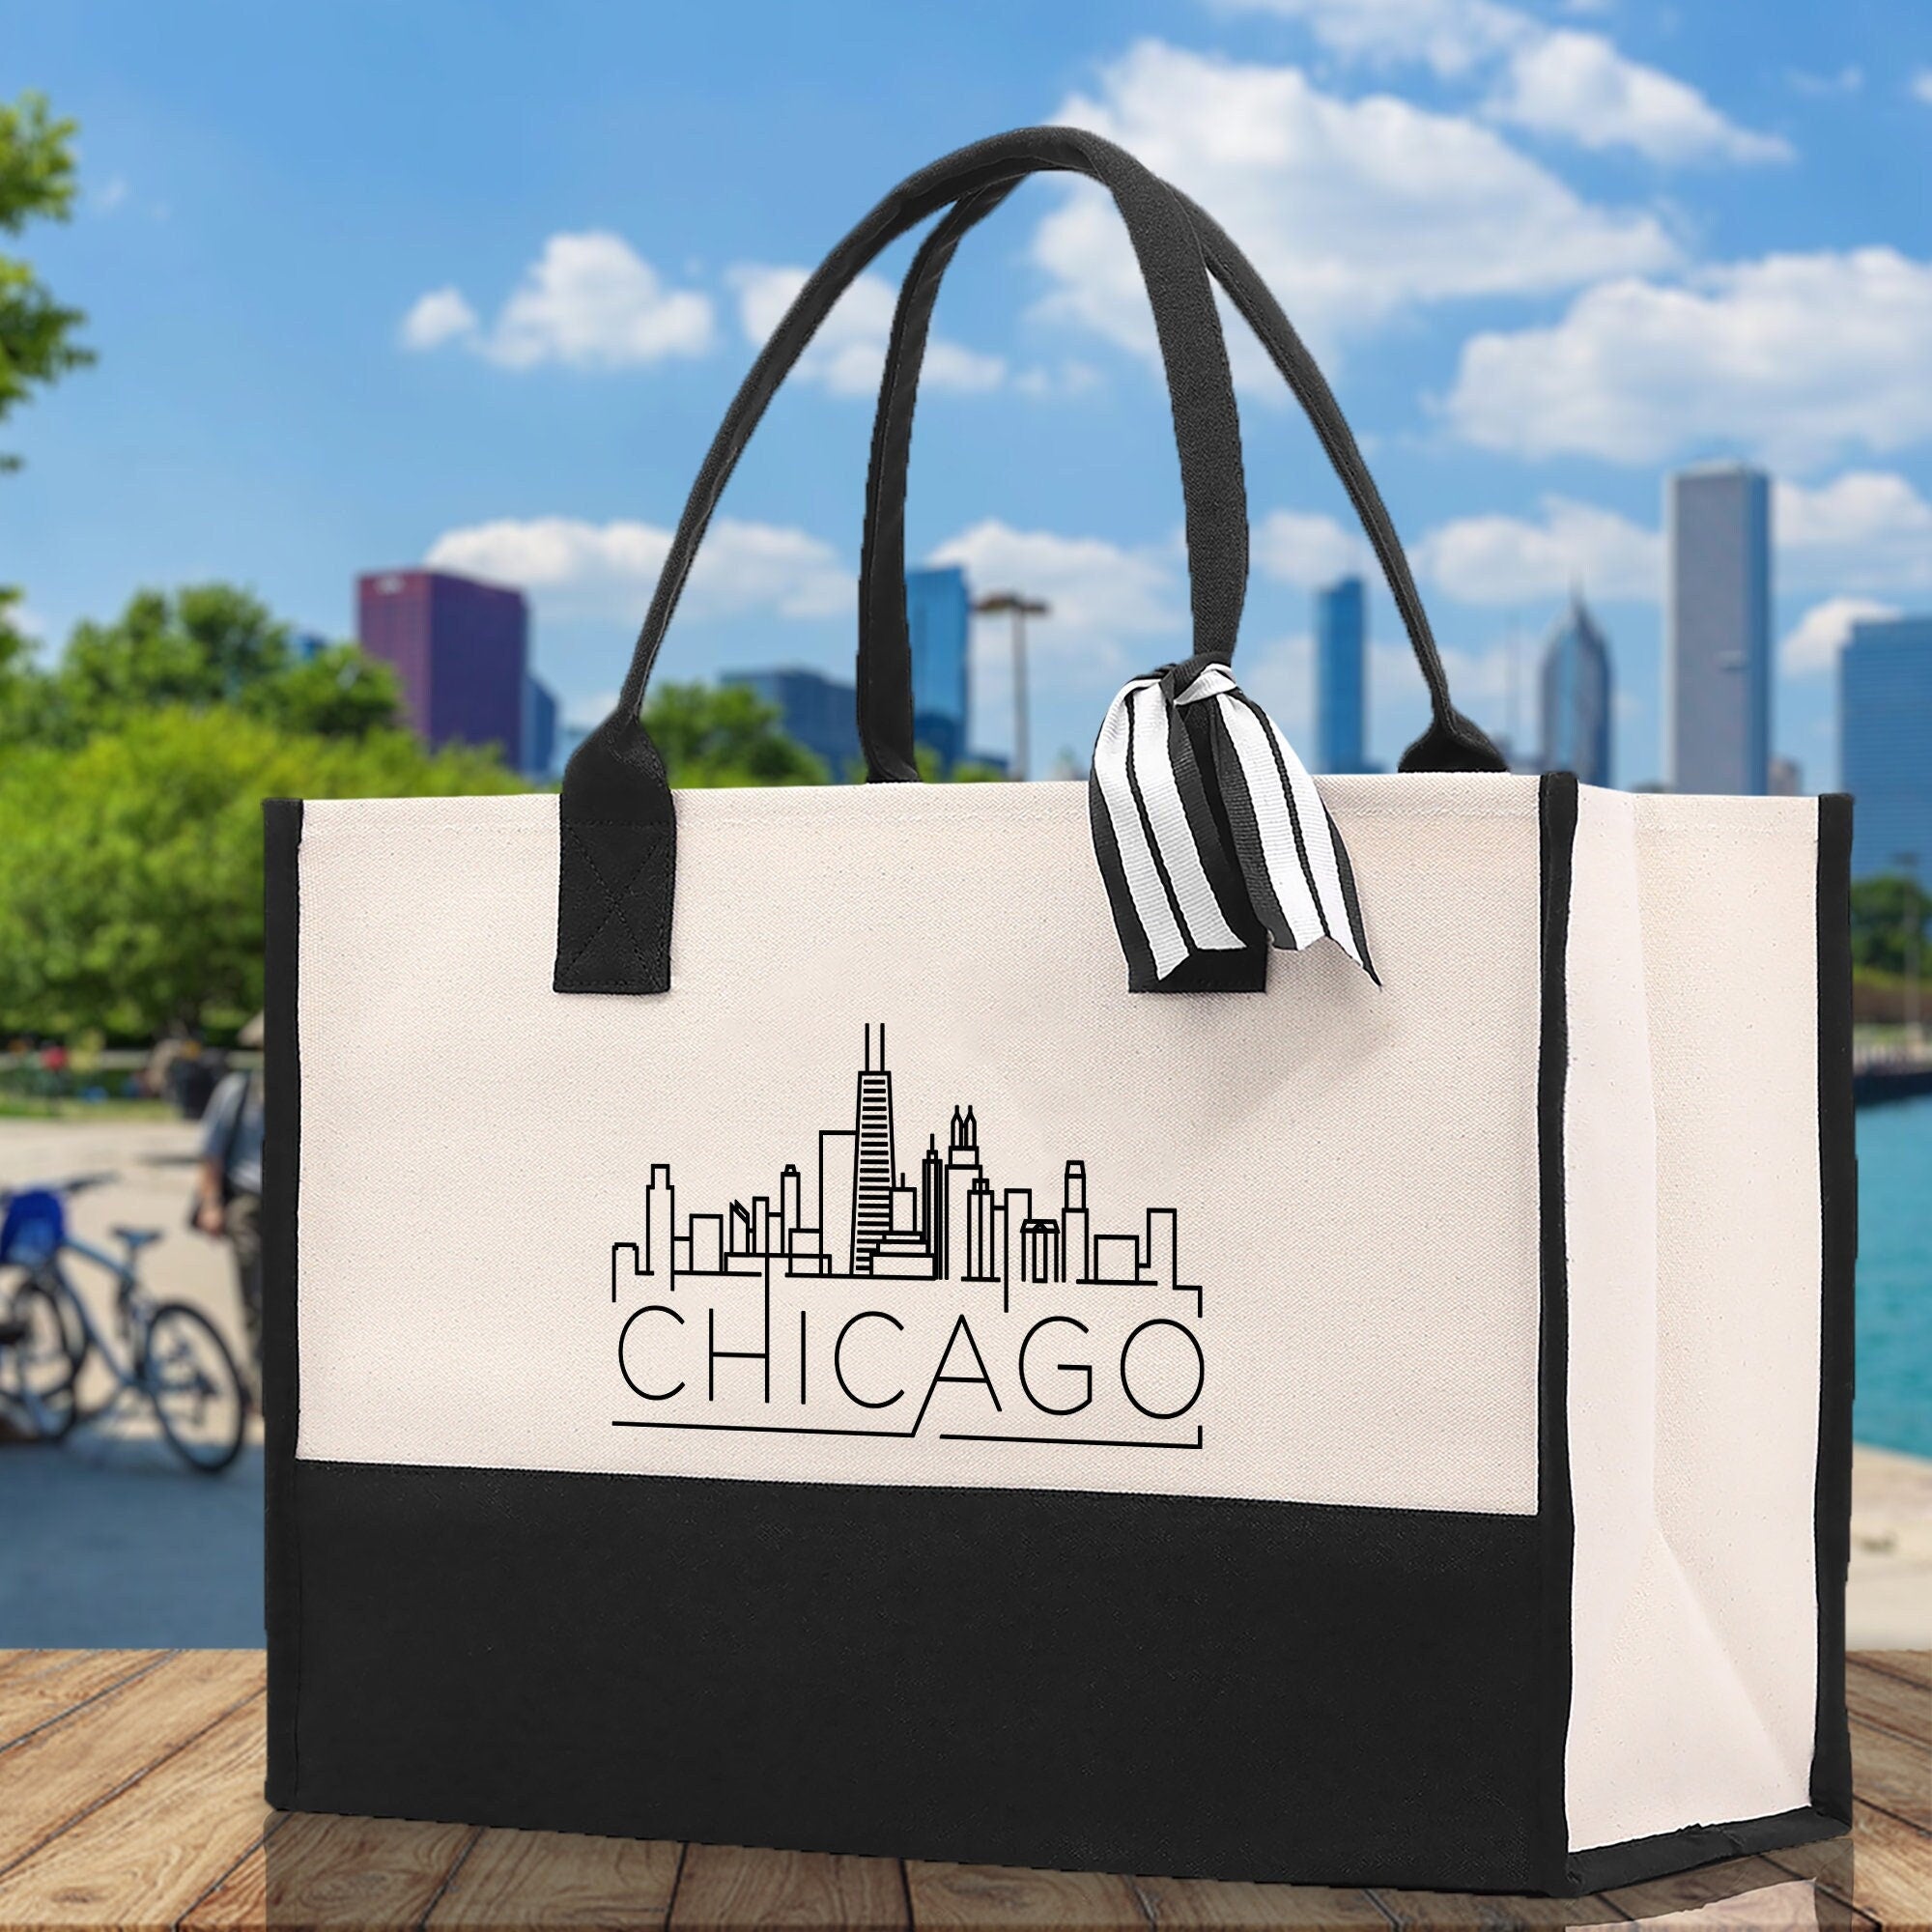 Chicago Cotton Canvas Tote Bag Travel Vacation Tote Employee and Client Gift Wedding Favor Birthday Welcome Tote Bag Bridesmaid Gift